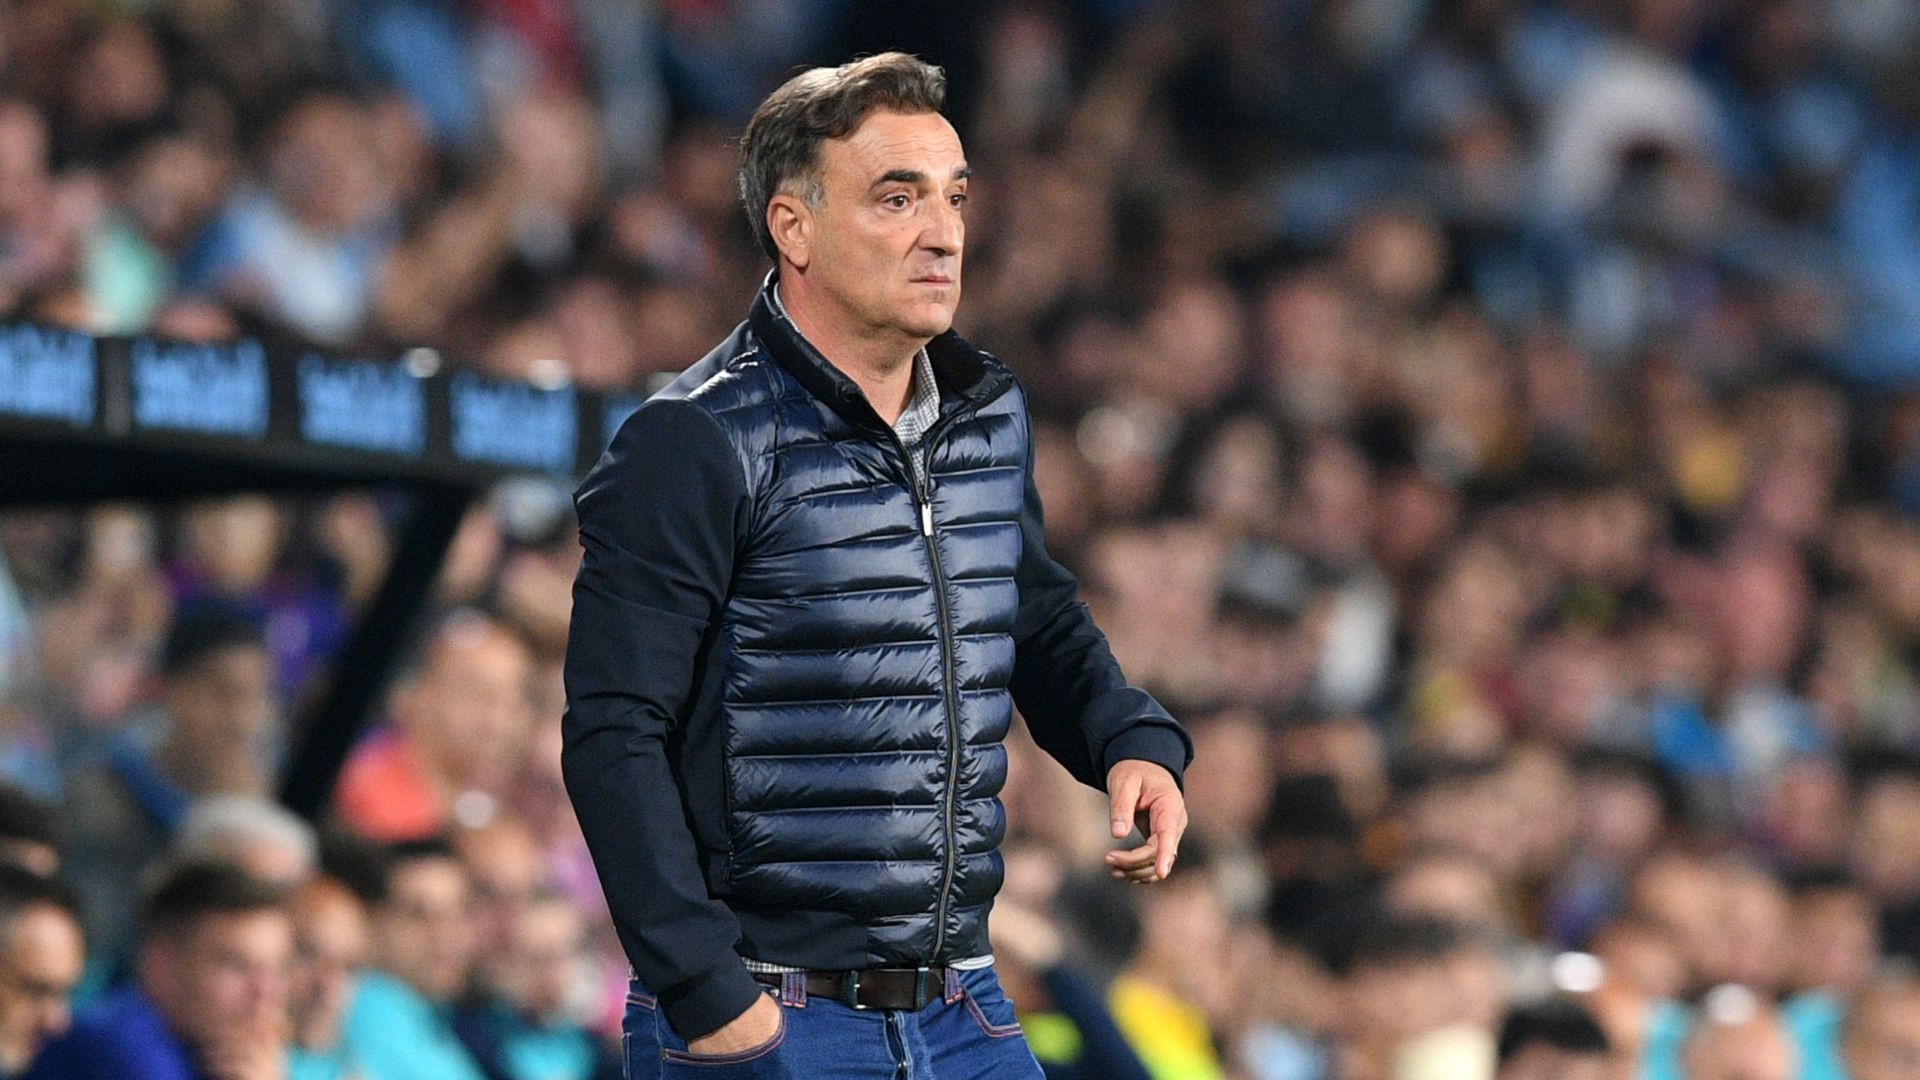 Carlos Carvalhal is also an option for Atlético-MG